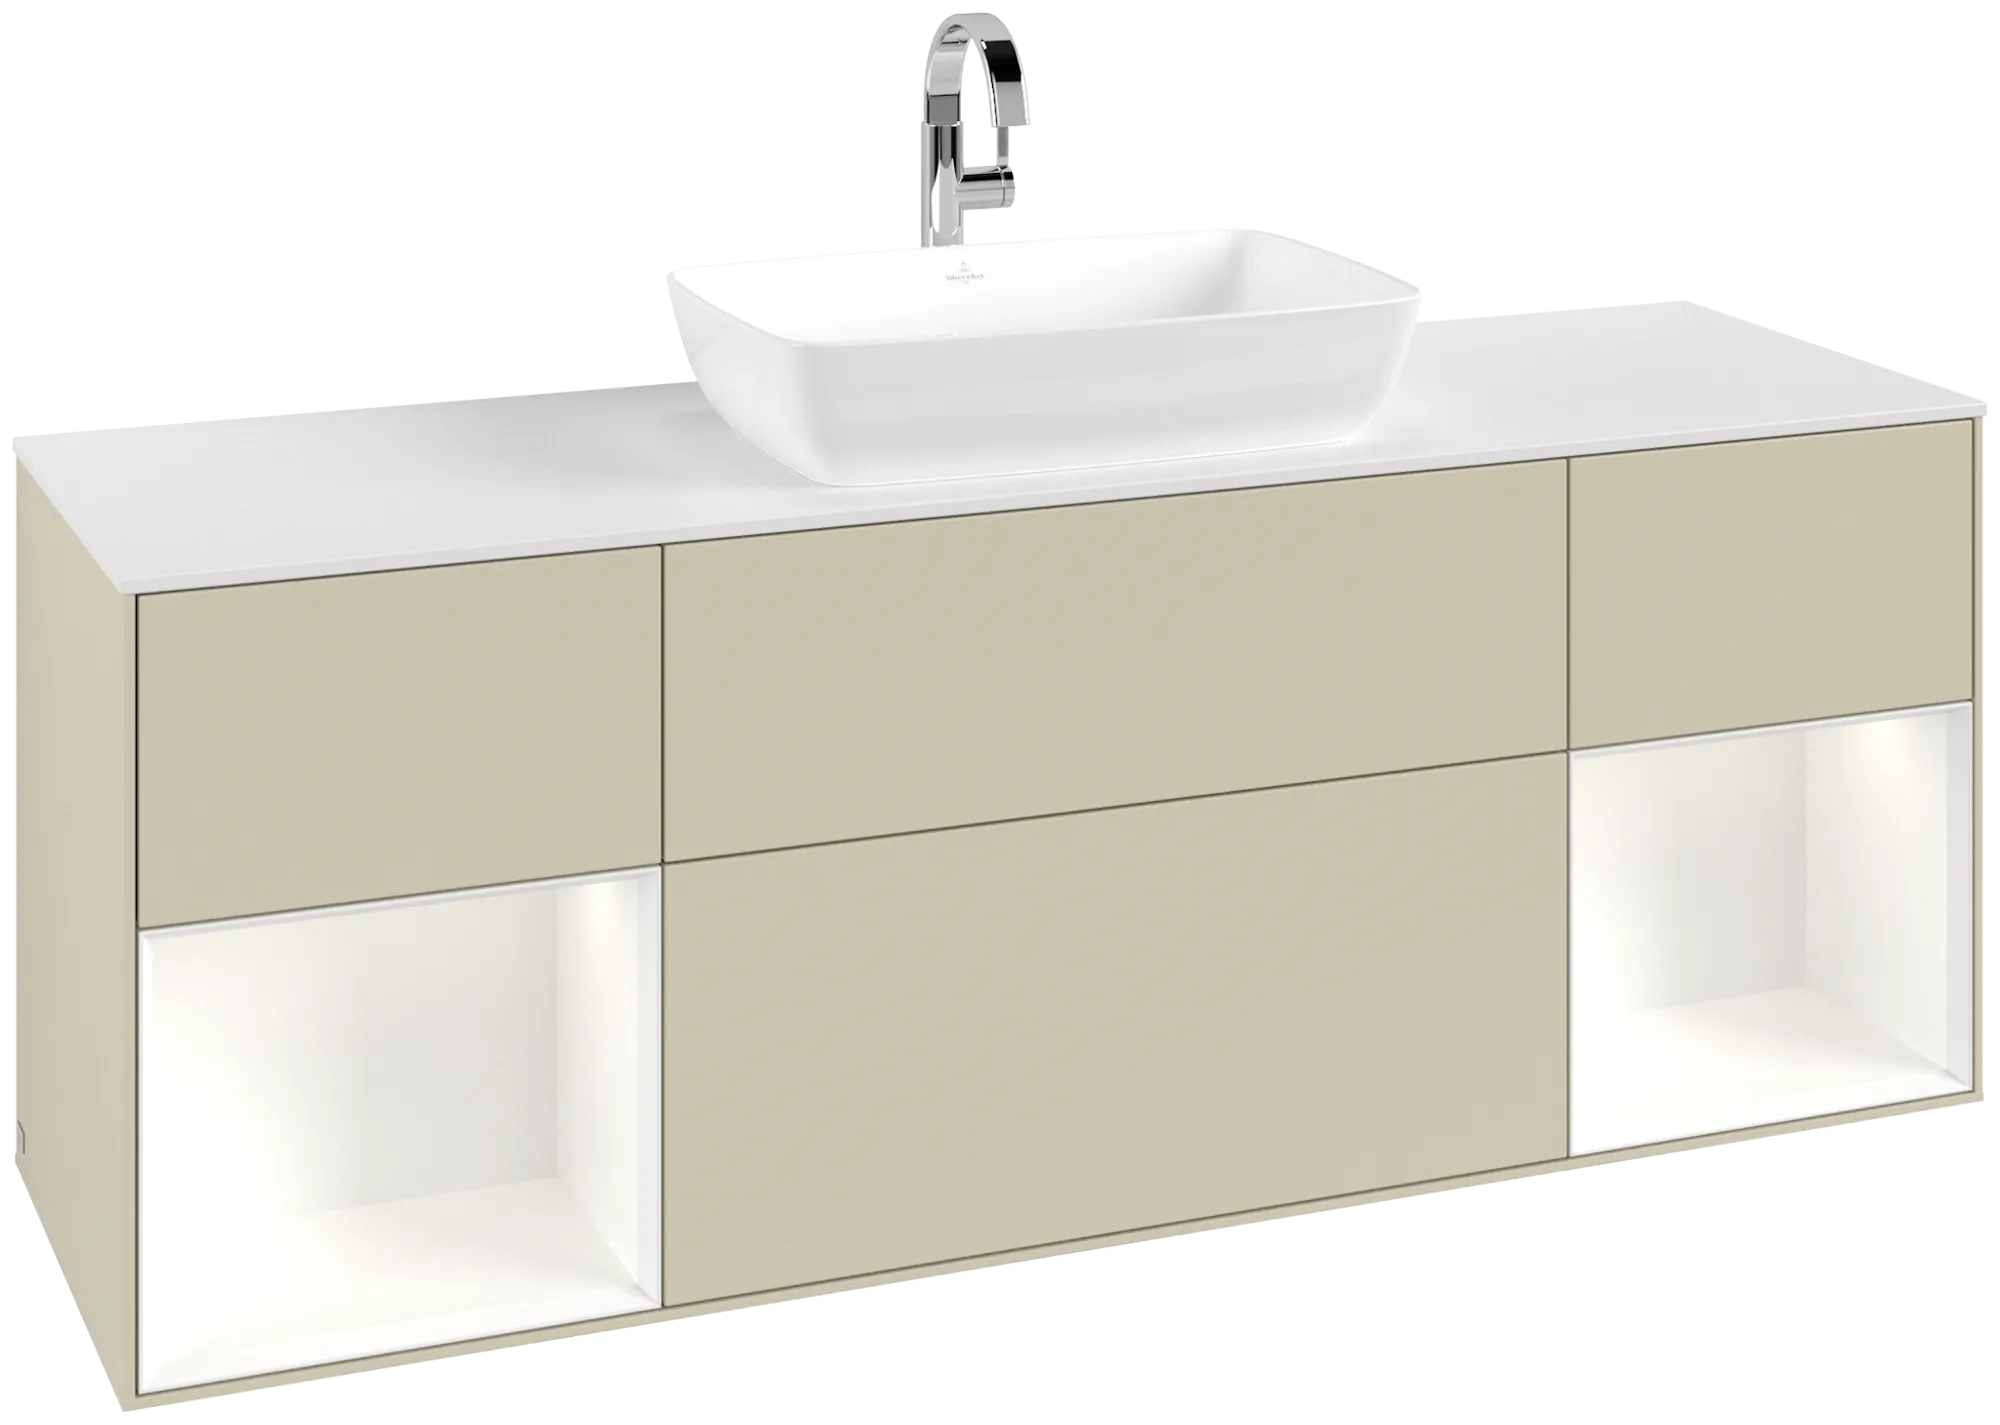 Obrázek VILLEROY BOCH Finion Vanity unit, with lighting, 4 pull-out compartments, 1600 x 603 x 501 mm, Silk Grey Matt Lacquer / White Matt Lacquer / Glass White Matt #G861MTHJ